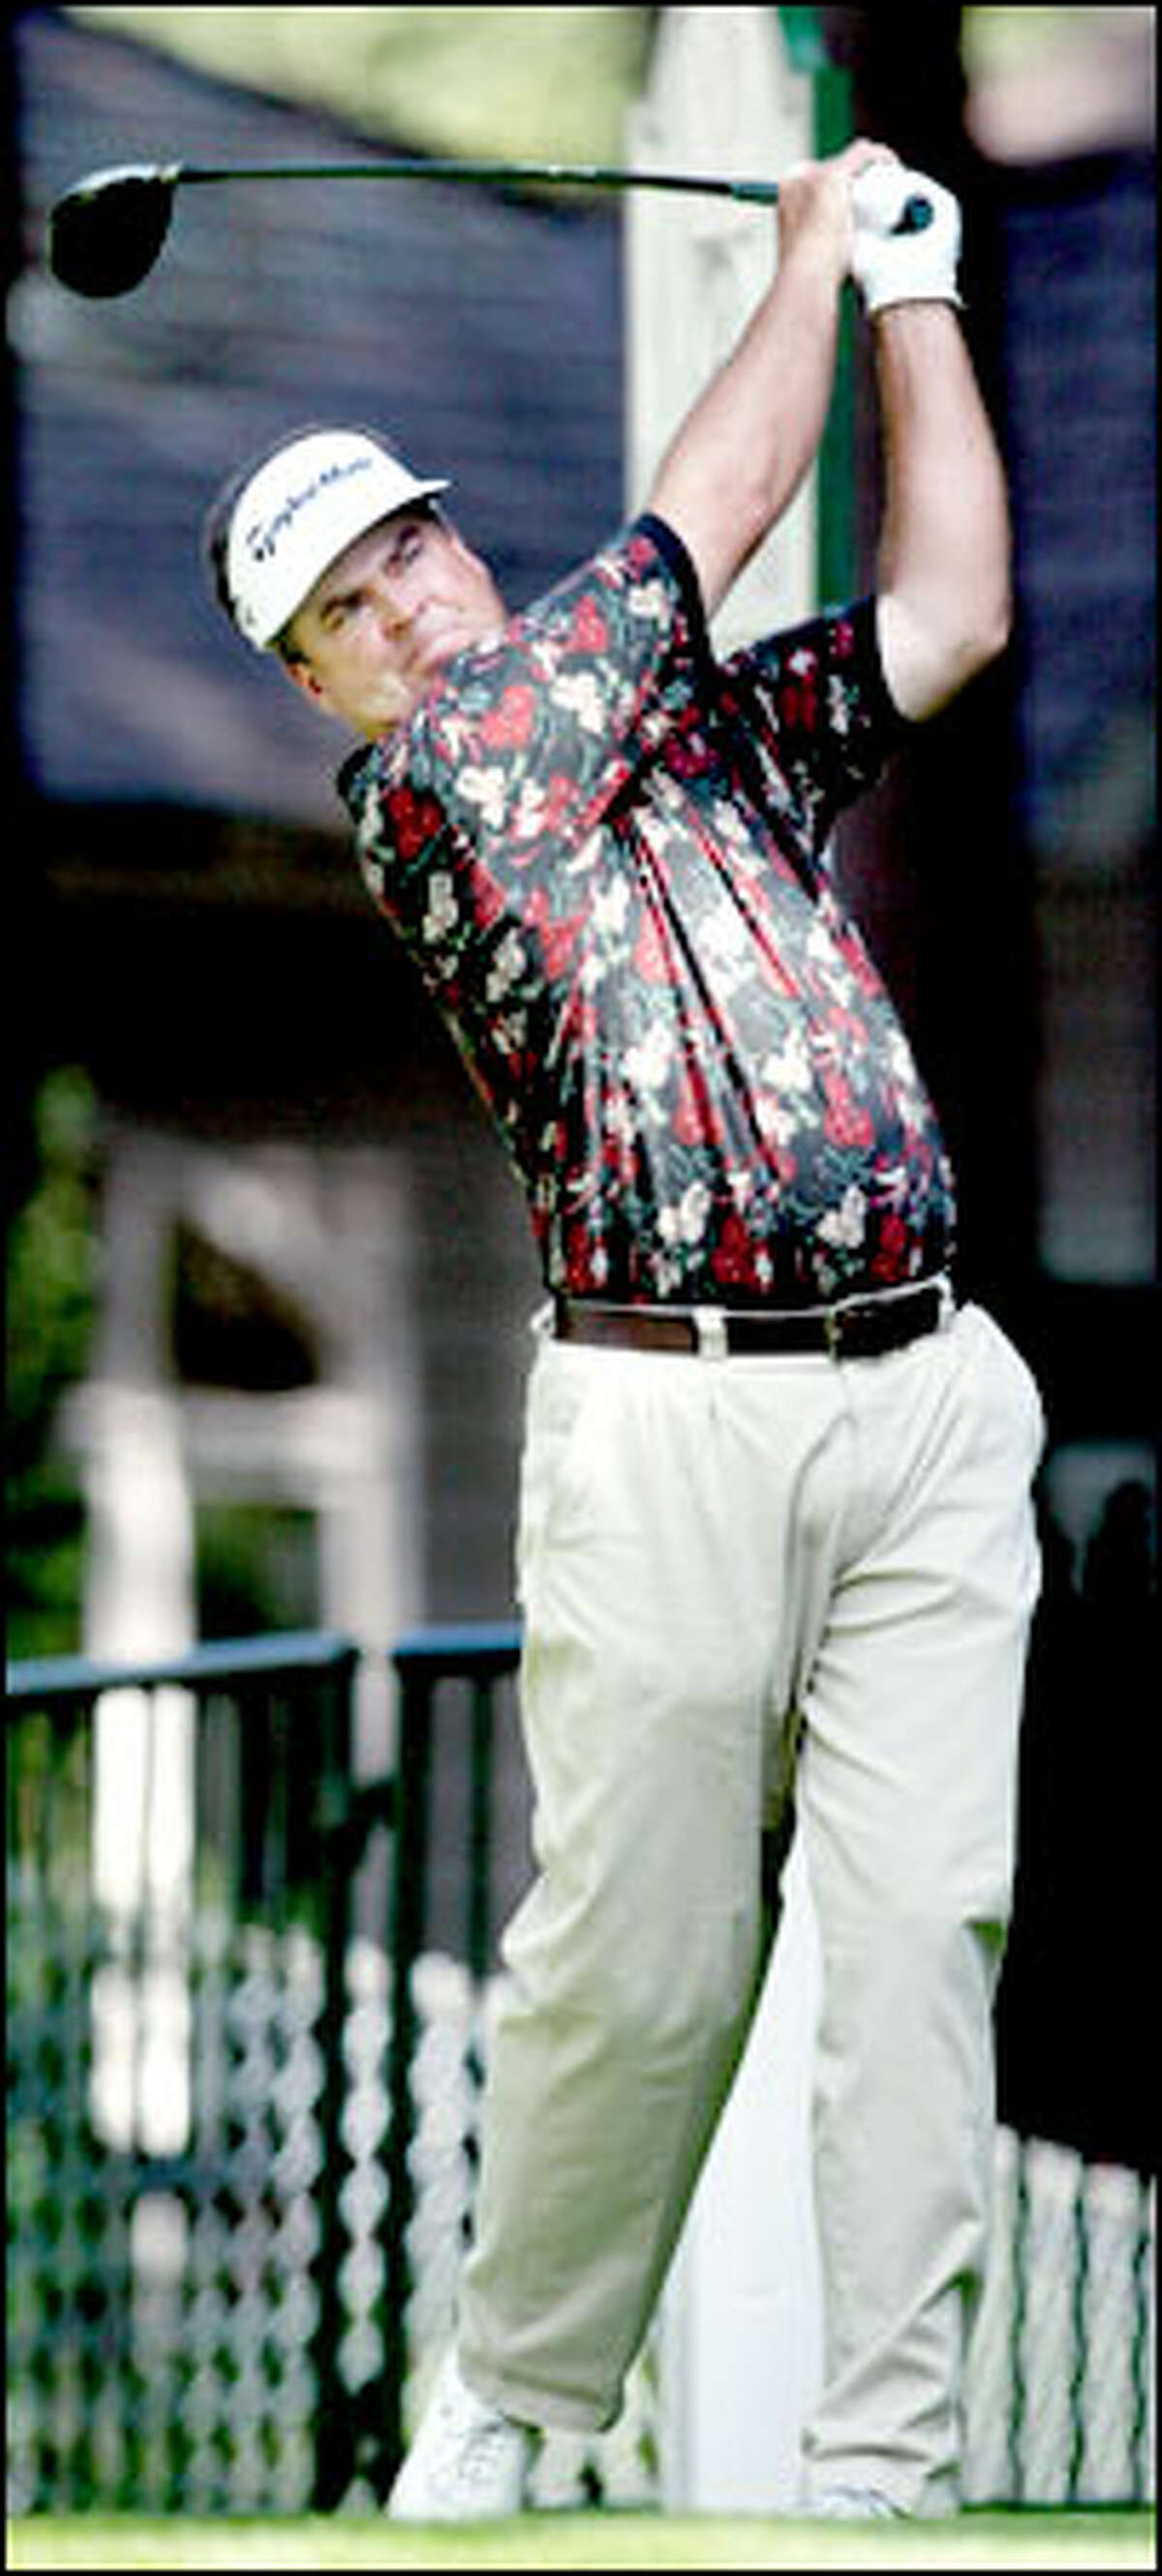 Kenny Perry was a fashion standout on a day dominated by golf shirts so tasteful they bordered on boring. His colorful shirt with a tomato and chili pepper motif was a rare display of color on the Sahalee greens.